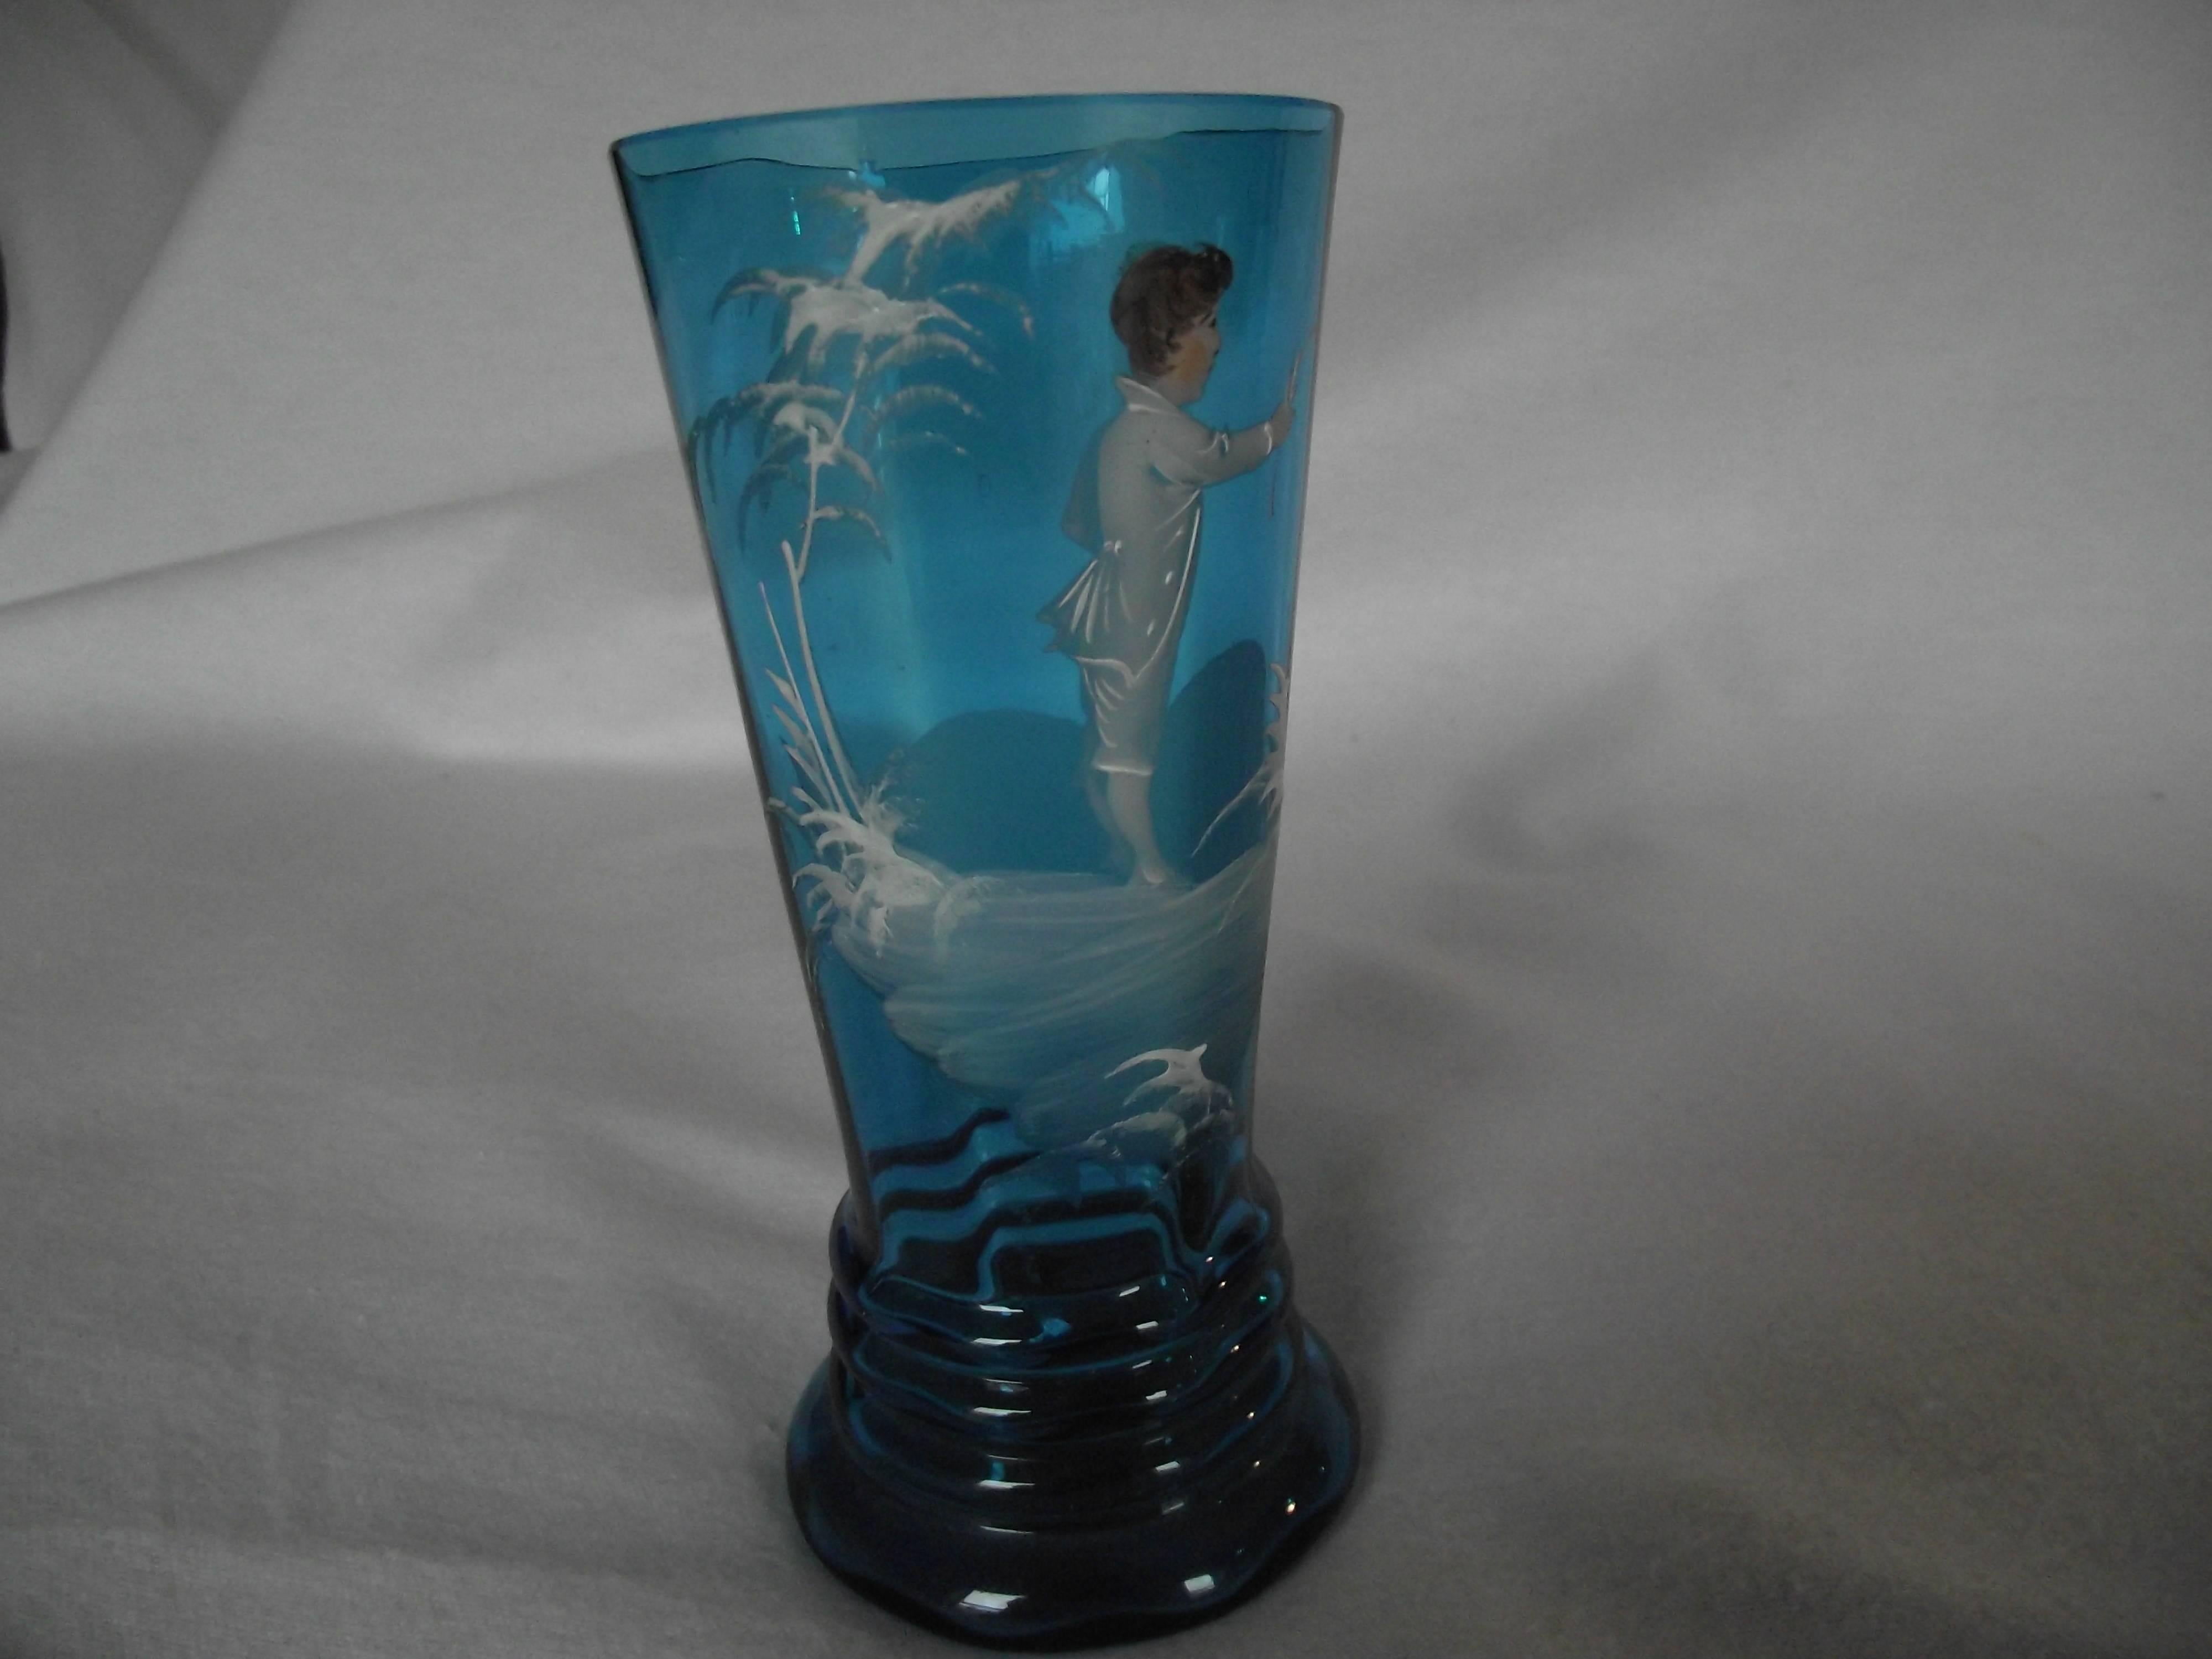 This exquisite little vase features a very detailed hand painted enamel scene with an young boy, trees, birds and trees.
No cracks, chips or paint loss.